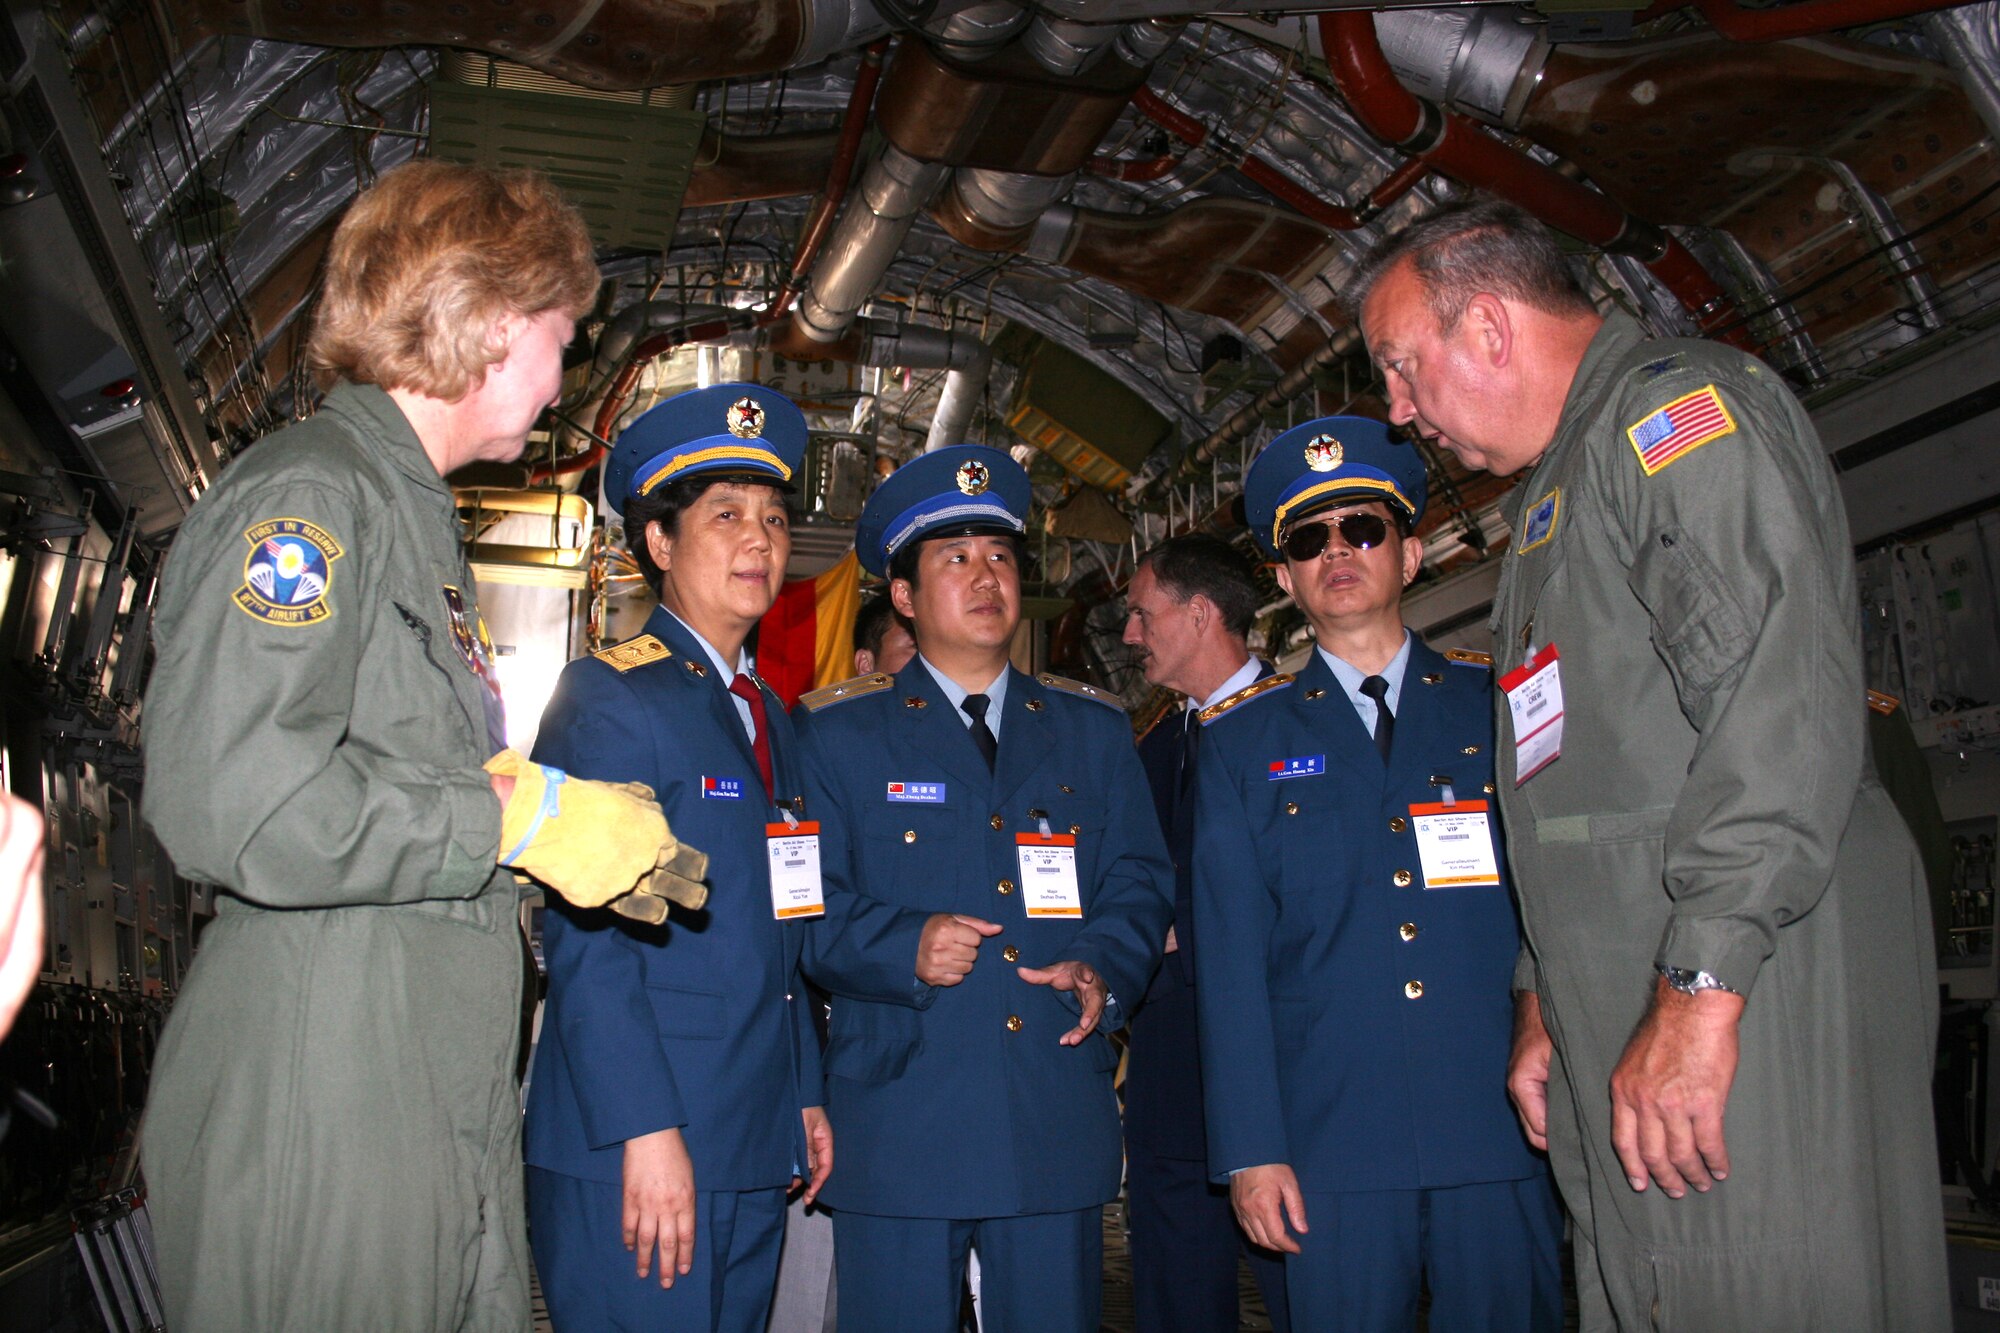 Chief Master Sgt. Evelyn Irwin and Col. Gary Cook discuss the C-17 Globemaster III's cargo load capabilities with members of a Chinese delegation visiting the Berlin Air Show May 16, 2006. The Chinese delegation included (from left center) Maj. Gen. Yue Xicui, Lt. Gen. Huang Xin and Maj. Zhang Dezhao. General Xicui is the Chinese Air Force's first female pilot and has more than 6,000 flying hours.  Various models of U.S. military aircraft and about 60 support personnel from bases in Europe and the United States are attending the air show at Berlin-Schoenefeld Airport May 16-21.  Chief Irwin and Colonel Cook are from the 315th Airlift Wing at Charleston Air Force Base, S.C.  (U.S. Air Force photo/Maj. Pamela A.Q. Cook)